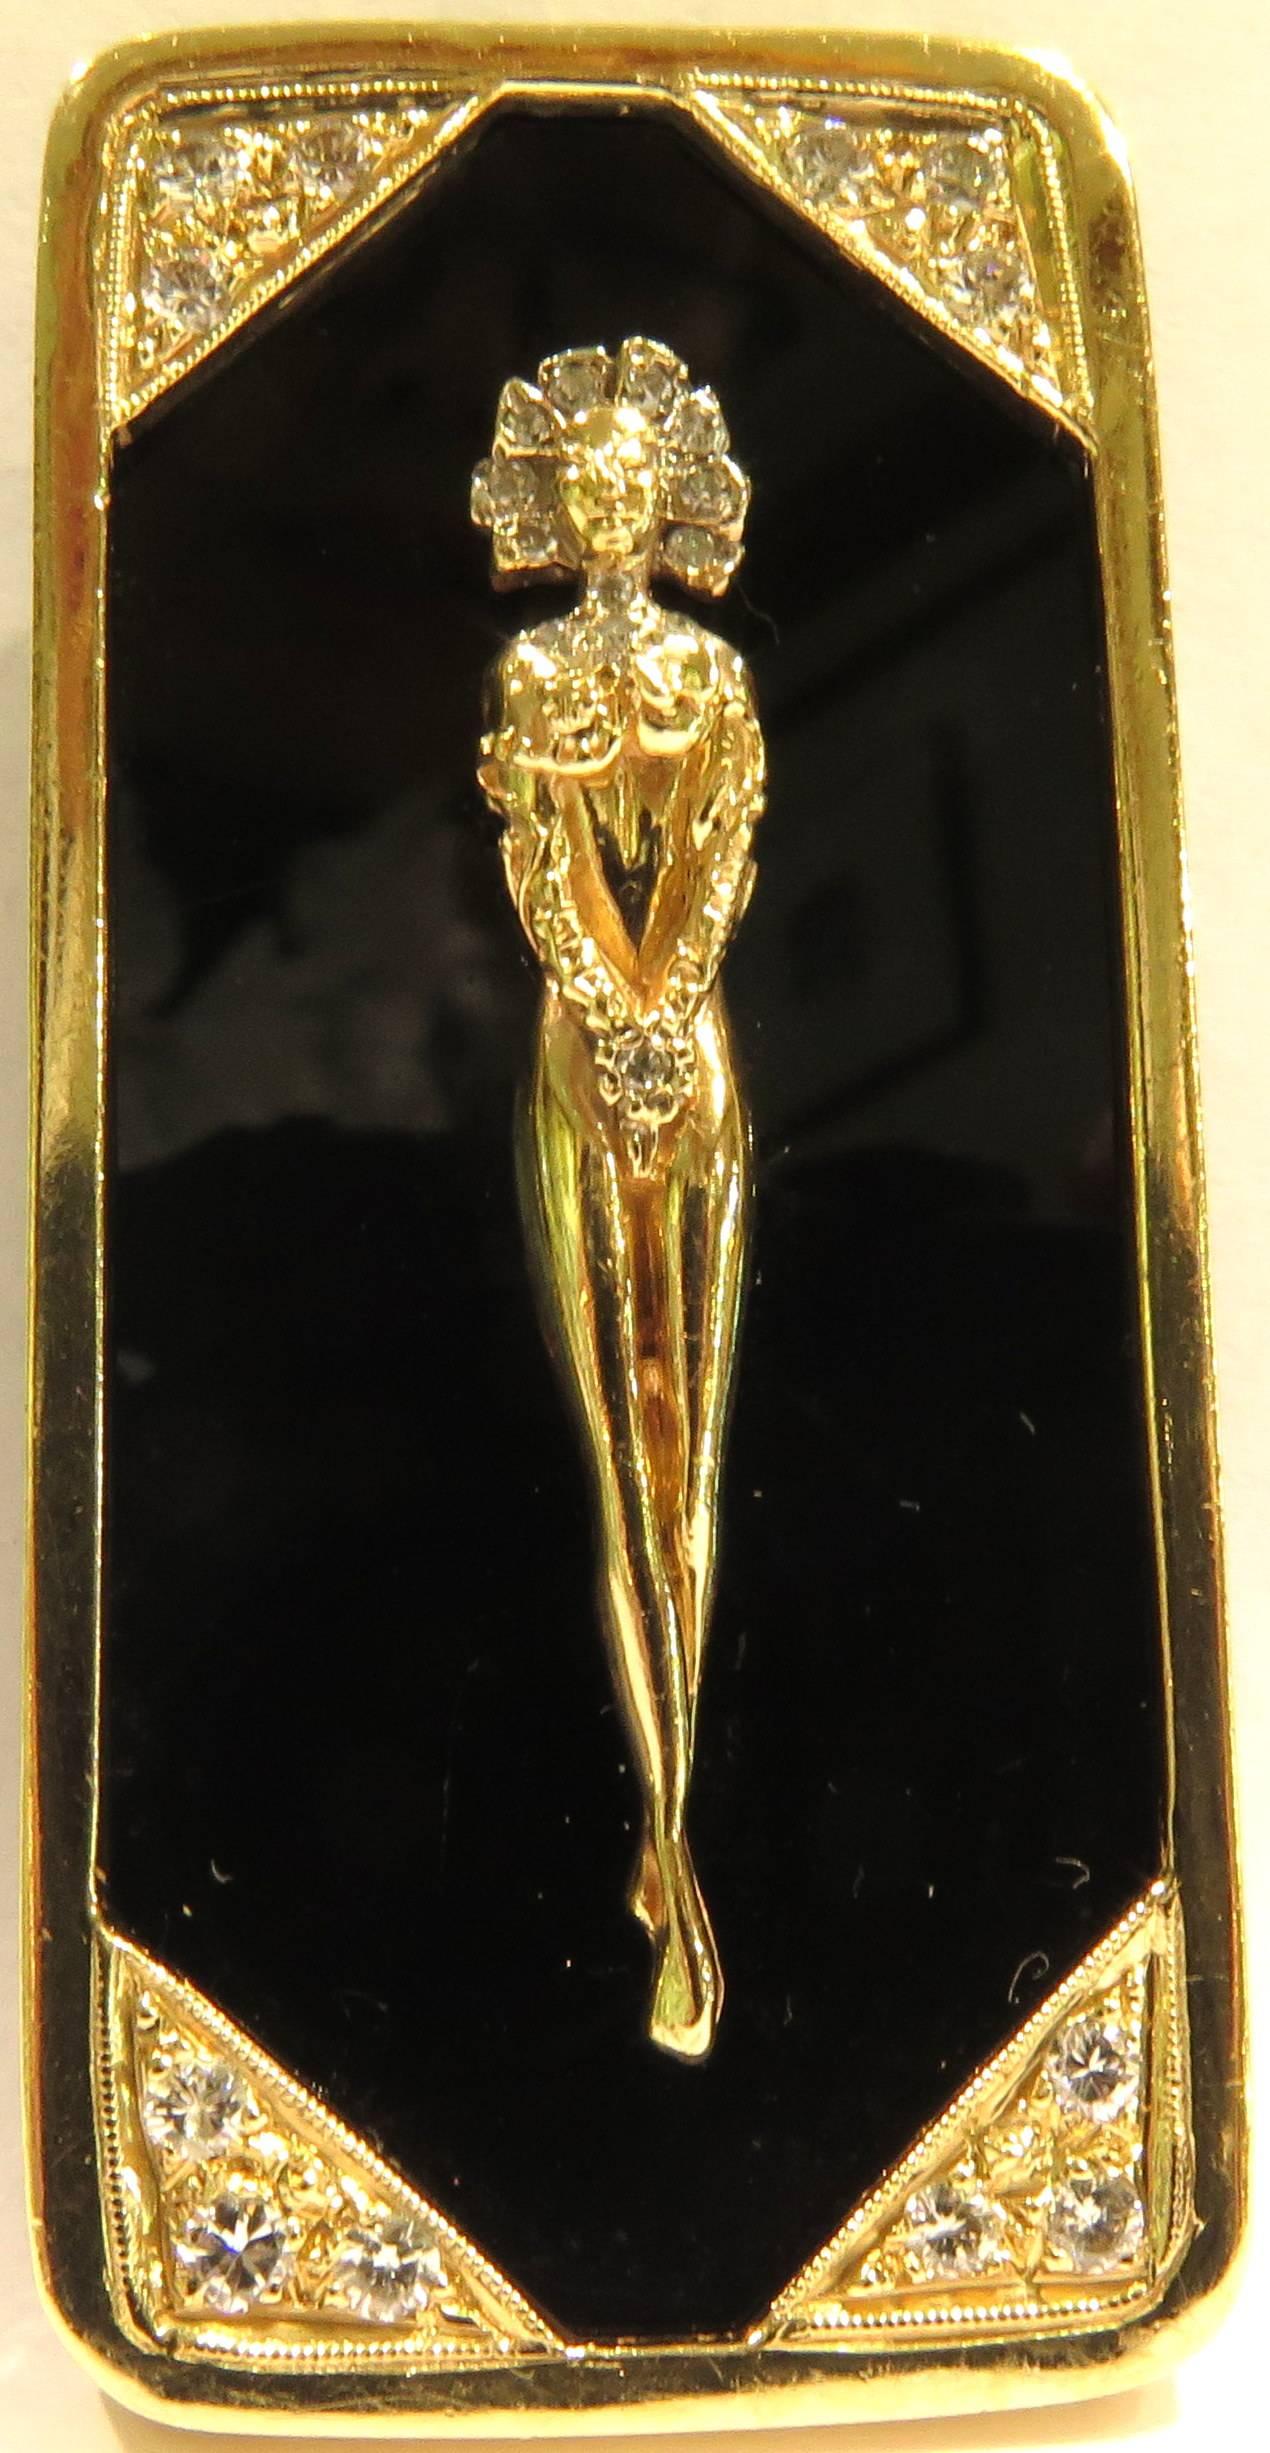 This14k elegant nude woman pin pendant is accented in each corner with diamond curtain corners. The back has a retracting bale for switching the pin to a pendant. 
This pin pendant measures 2 1/4 inch high (not including bale in up position) by 1